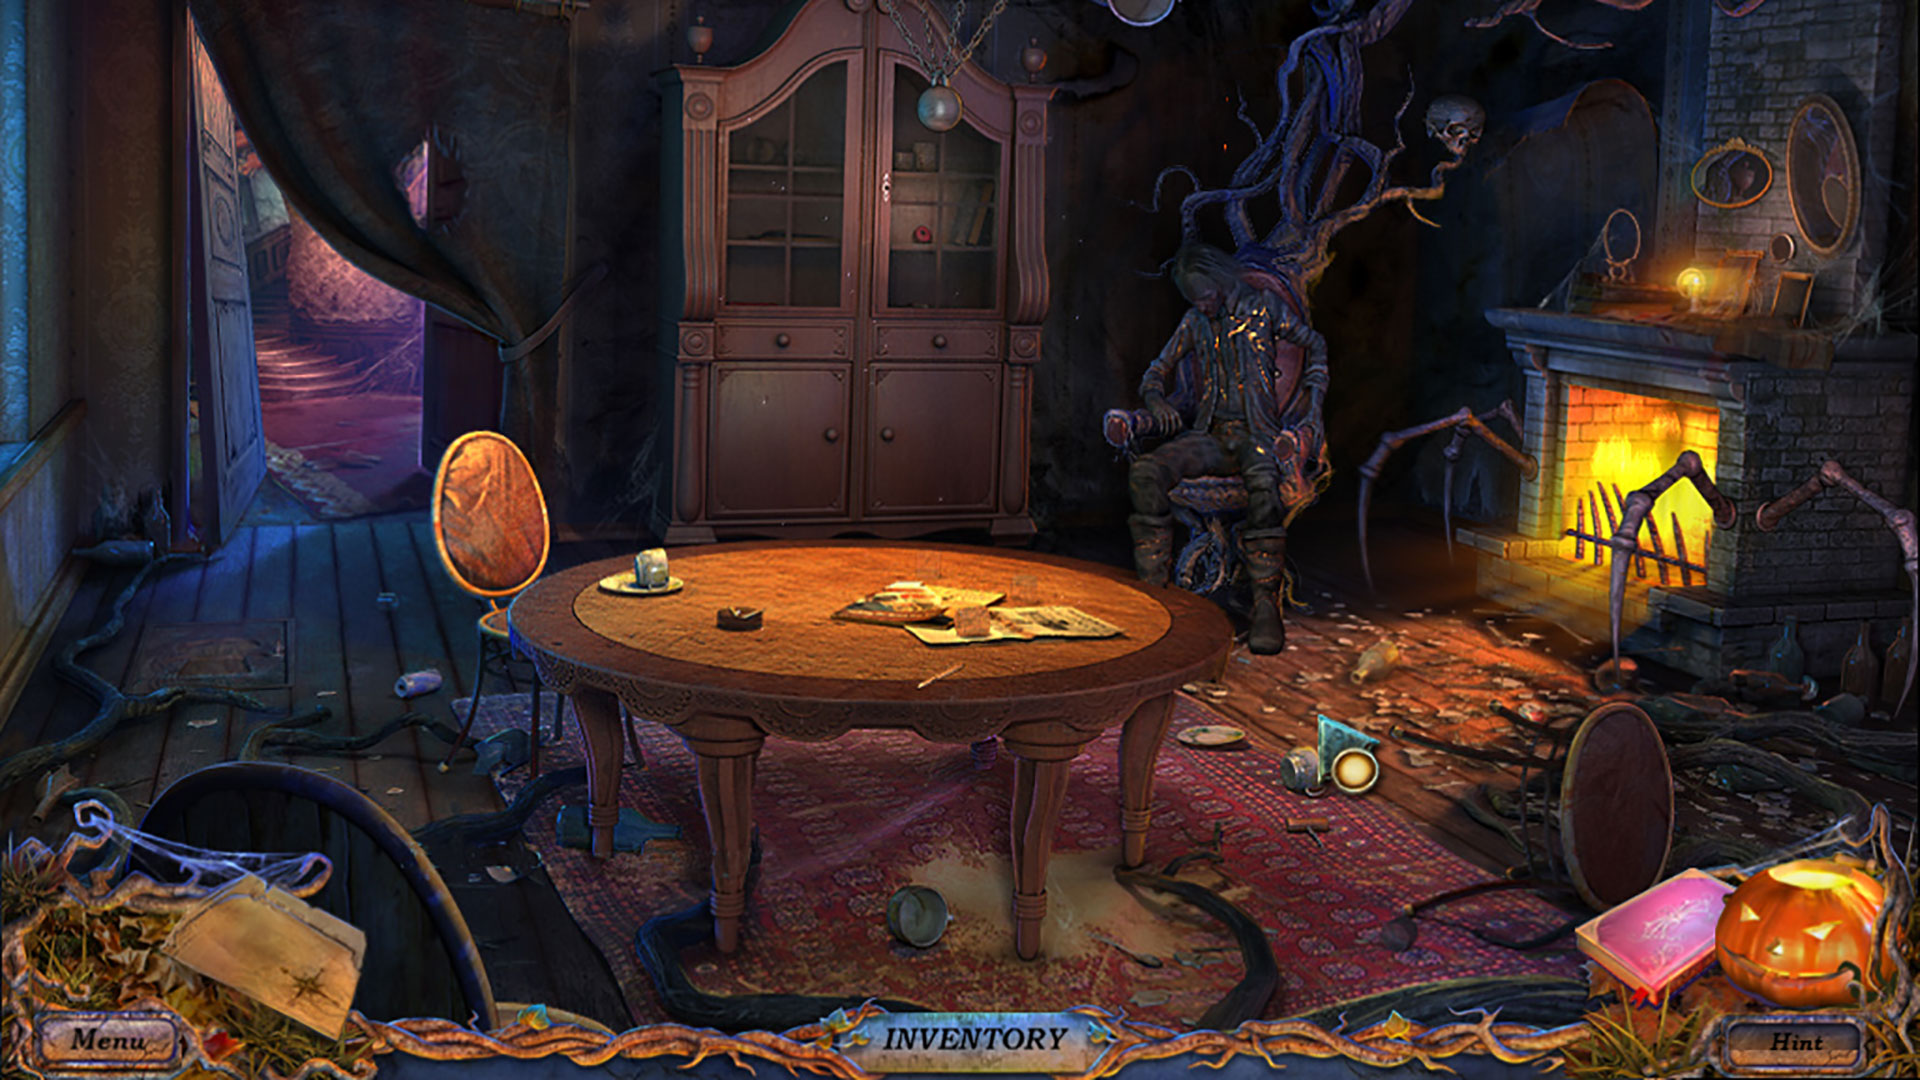 Game screenshot Teni: Plata za grehi / Shadows: Price For Our Sins (2013) PC |  Recondition from RG Mechanics